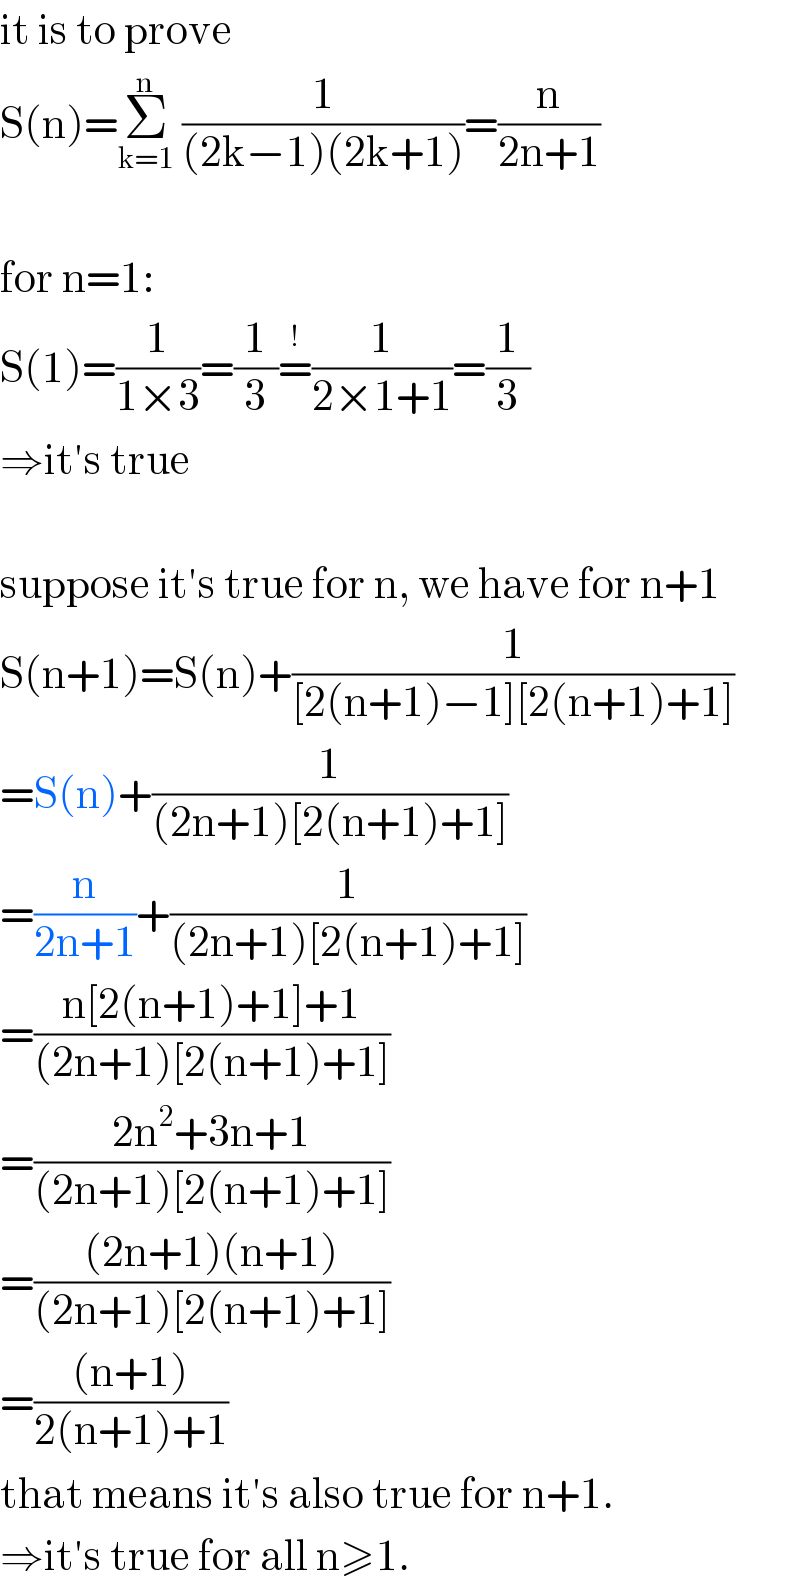 it is to prove  S(n)=Σ_(k=1) ^n  (1/((2k−1)(2k+1)))=(n/(2n+1))    for n=1:  S(1)=(1/(1×3))=(1/3)=^! (1/(2×1+1))=(1/3)  ⇒it′s true    suppose it′s true for n, we have for n+1  S(n+1)=S(n)+(1/([2(n+1)−1][2(n+1)+1]))  =S(n)+(1/((2n+1)[2(n+1)+1]))  =(n/(2n+1))+(1/((2n+1)[2(n+1)+1]))  =((n[2(n+1)+1]+1)/((2n+1)[2(n+1)+1]))  =((2n^2 +3n+1)/((2n+1)[2(n+1)+1]))  =(((2n+1)(n+1))/((2n+1)[2(n+1)+1]))  =(((n+1))/(2(n+1)+1))  that means it′s also true for n+1.  ⇒it′s true for all n≥1.  